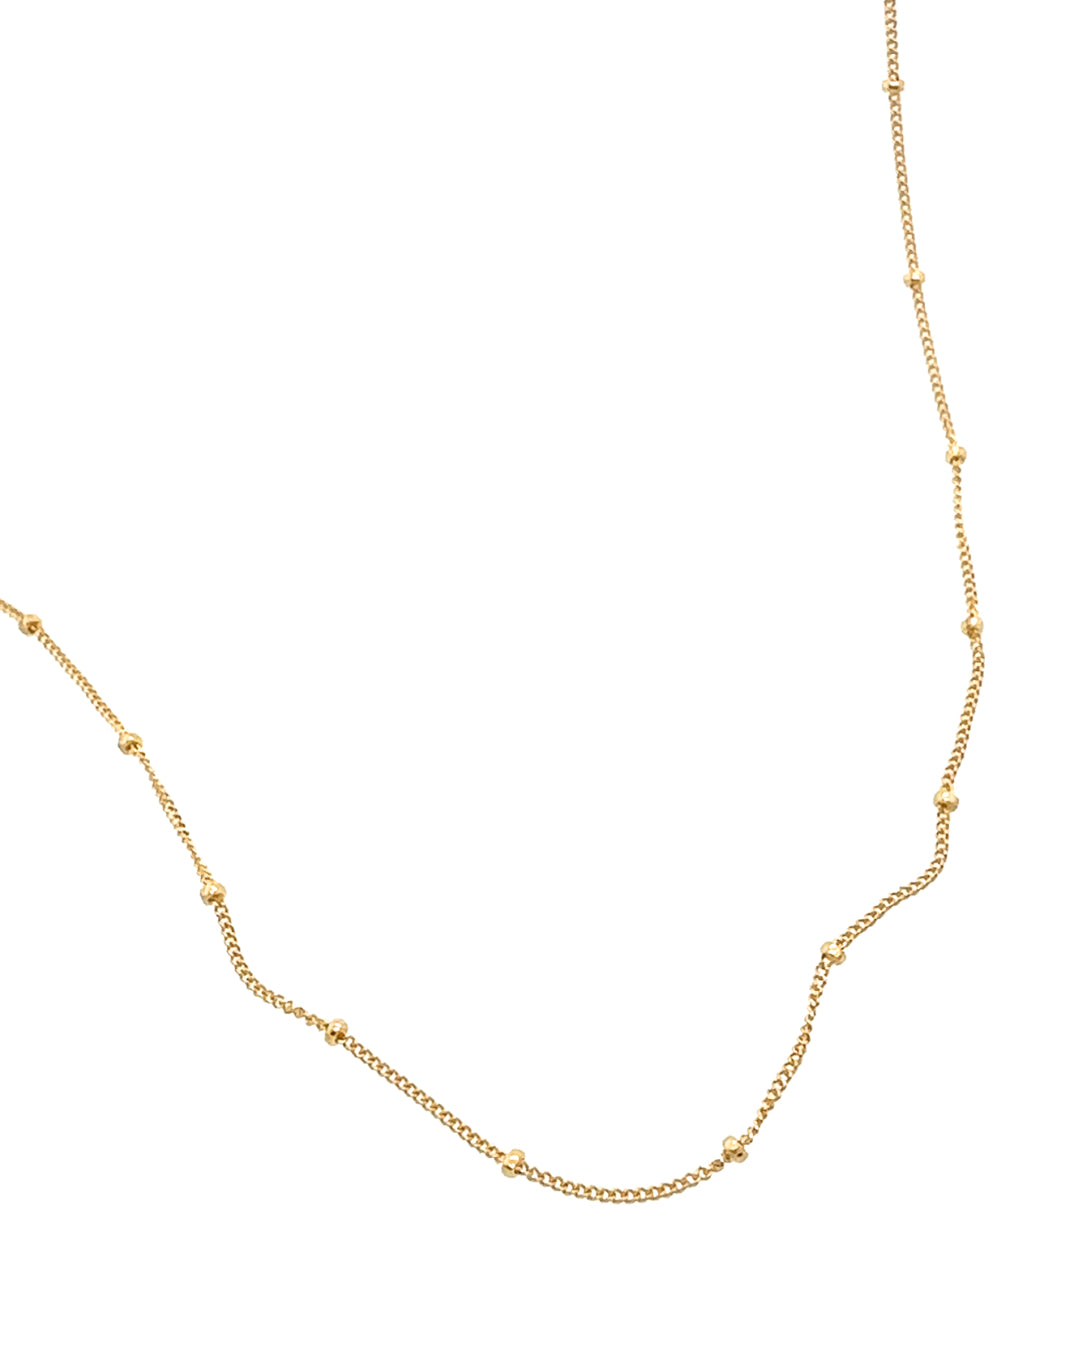 14k yellow gold fill satellite bead chain necklace 